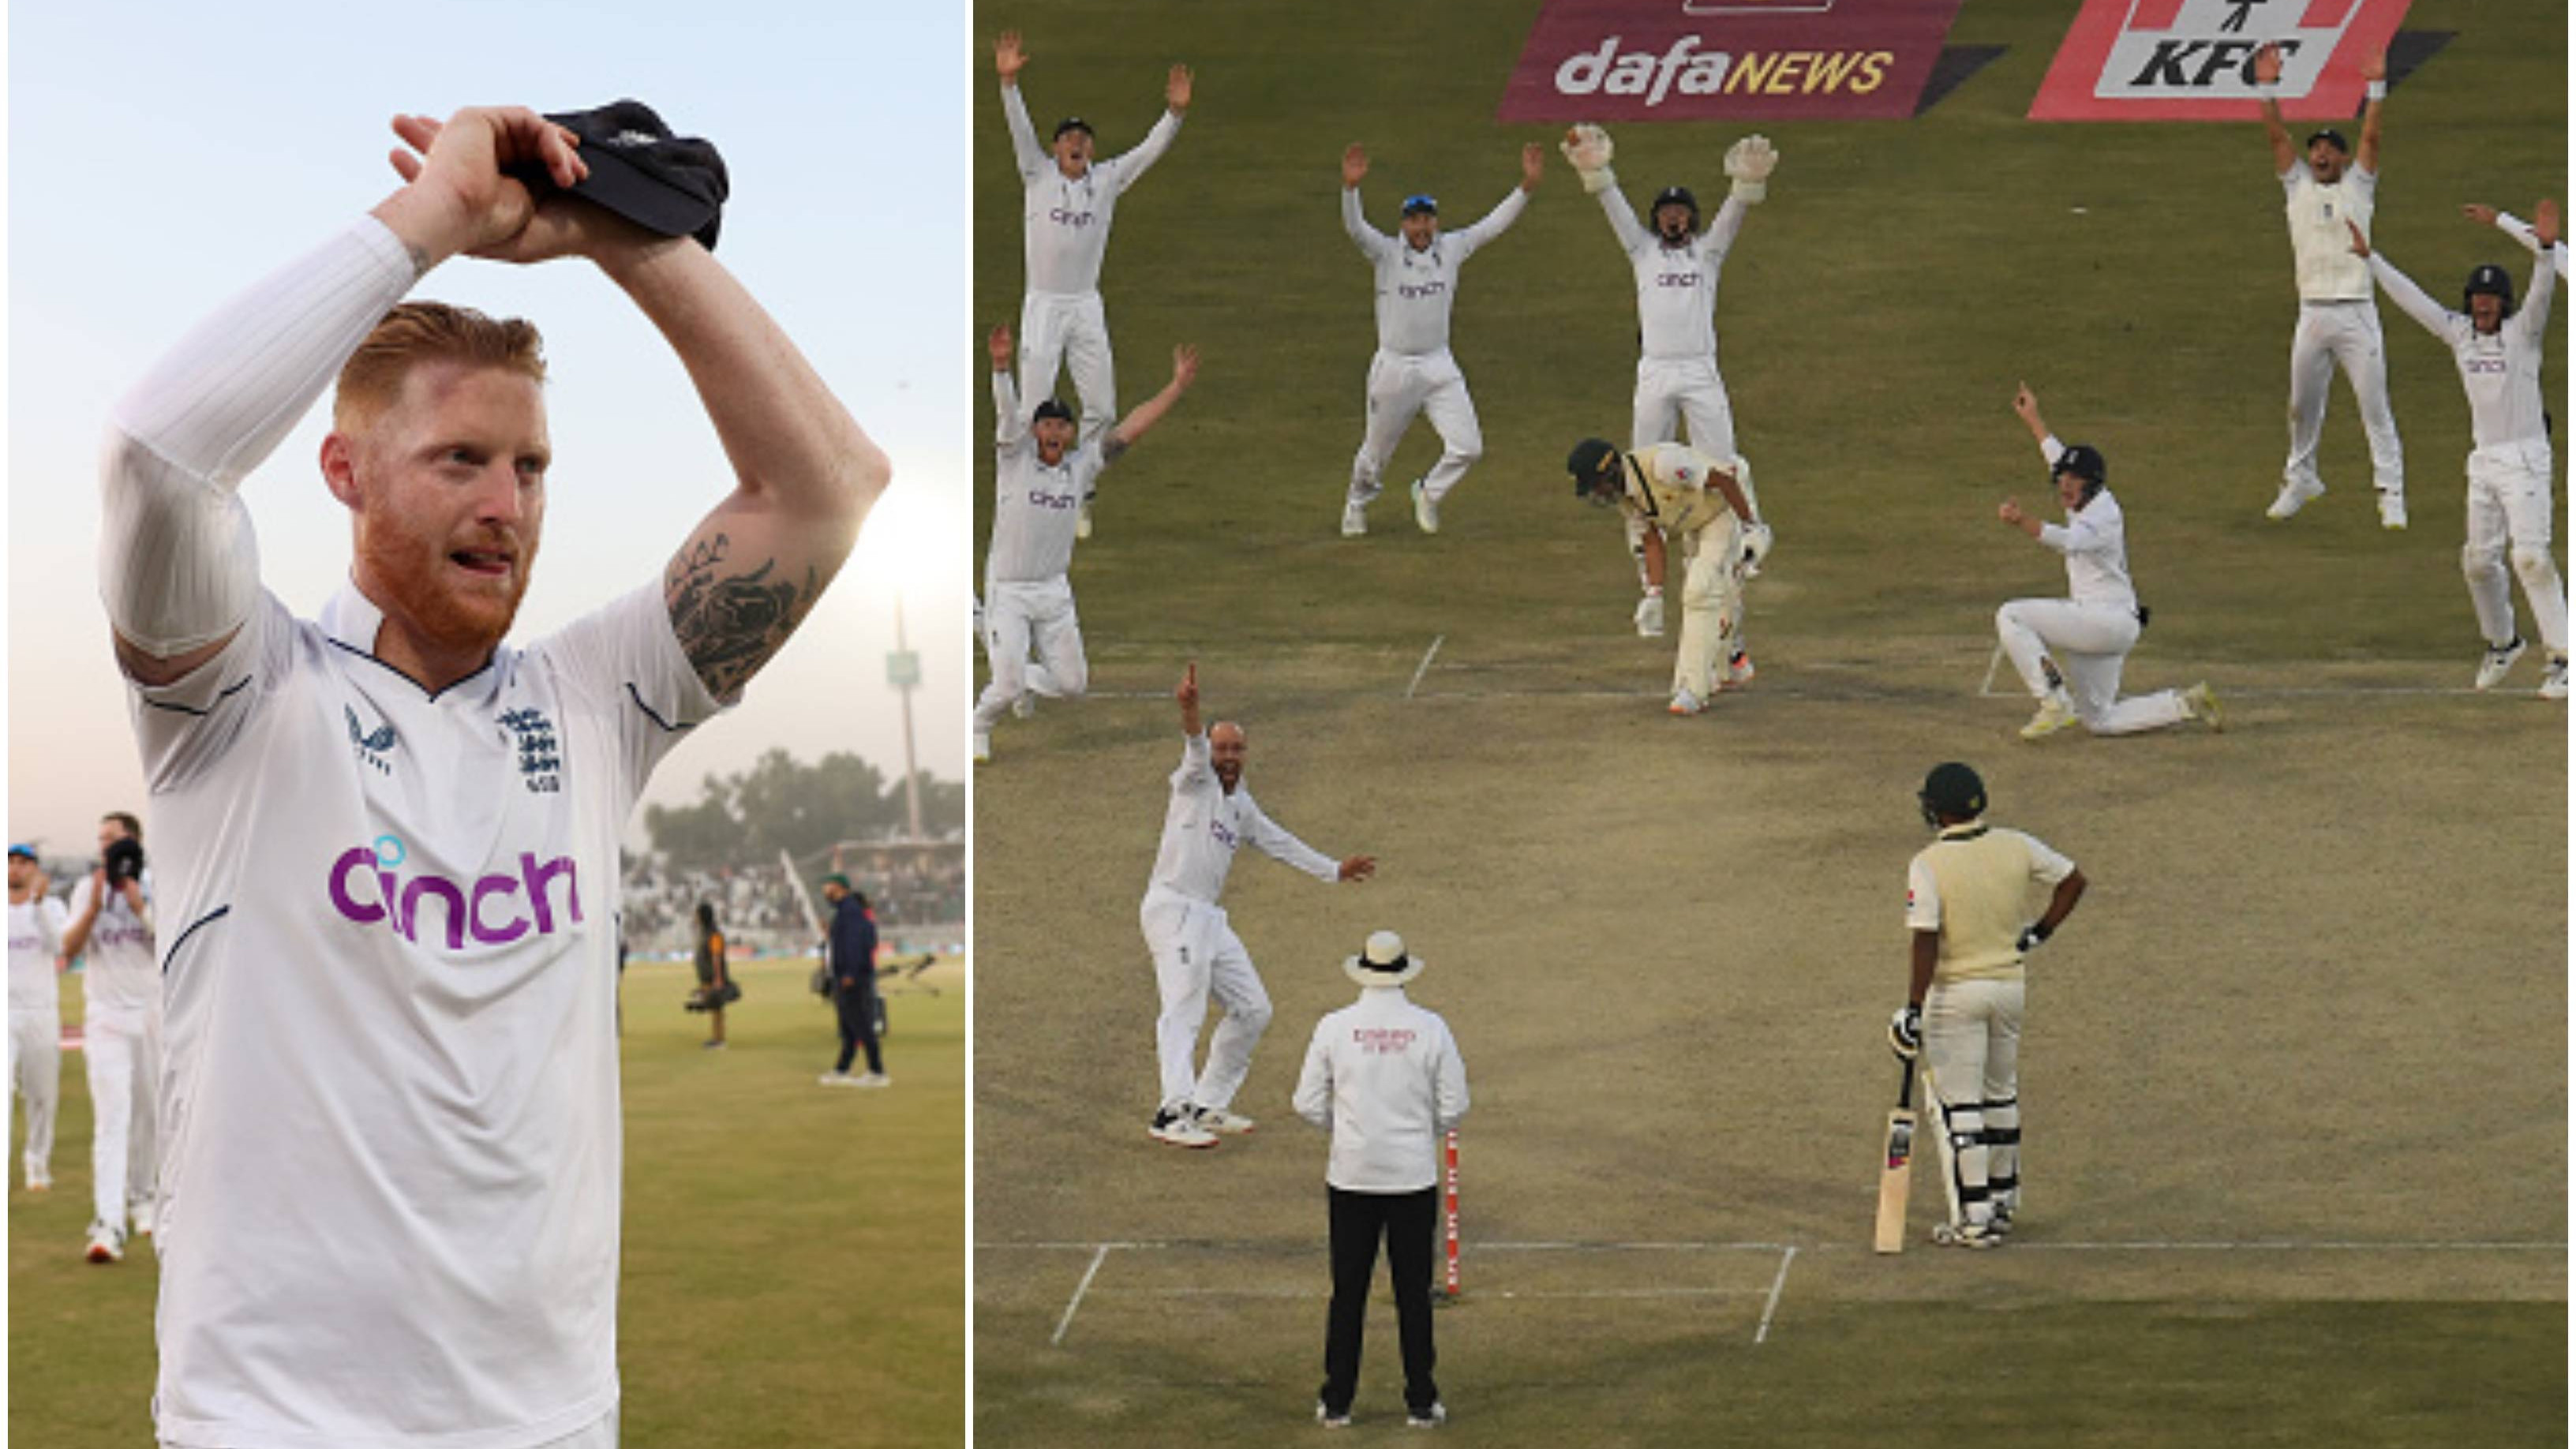 ENG v PAK 2022: Ben Stokes hails Rawalpindi Test win as “one of England's greatest” away from home